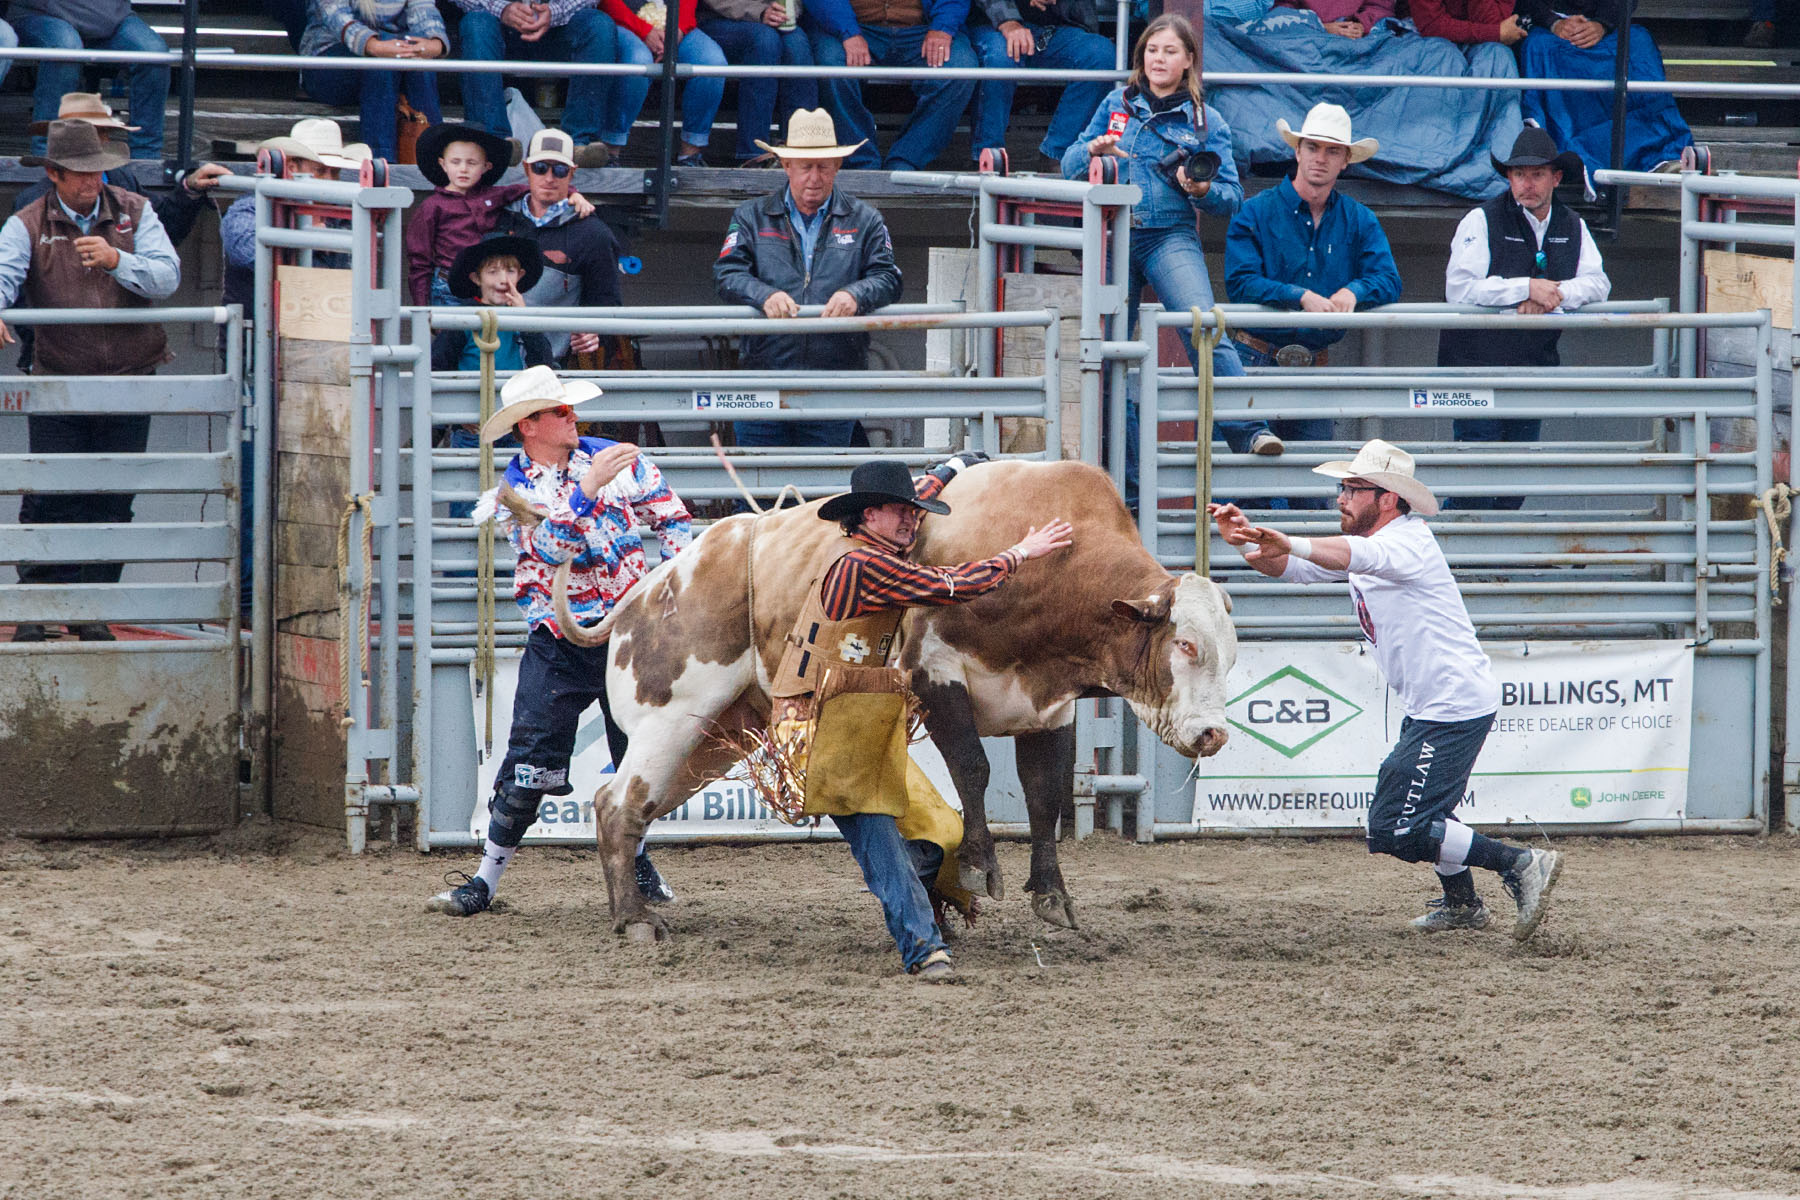 Bullfighter Ezra Coleman rushes in to help a bull rider whose hand is caught.  Bull Riding, Home of Champions Rodeo, Red Lodge, MT.  Click for next photo.